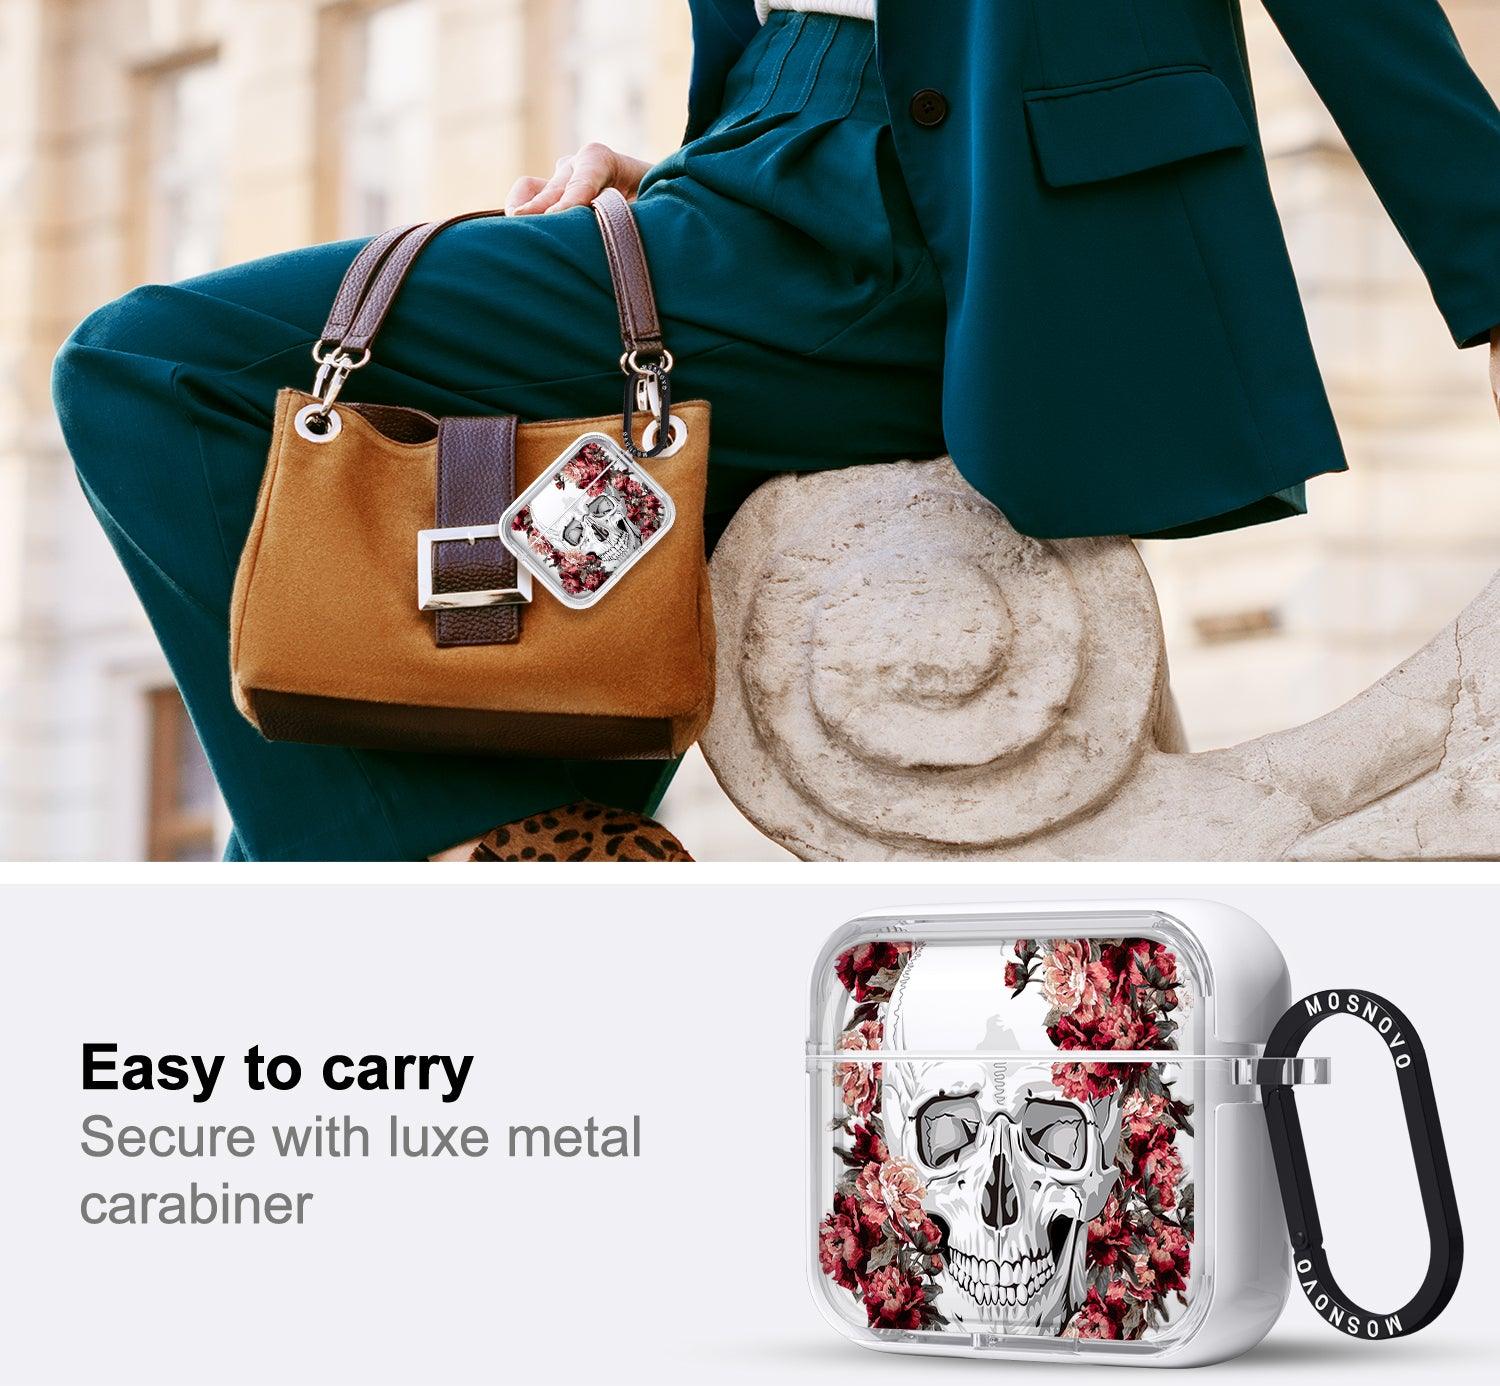 Cool Floral Skull AirPods 3 Case (3rd Generation) - MOSNOVO